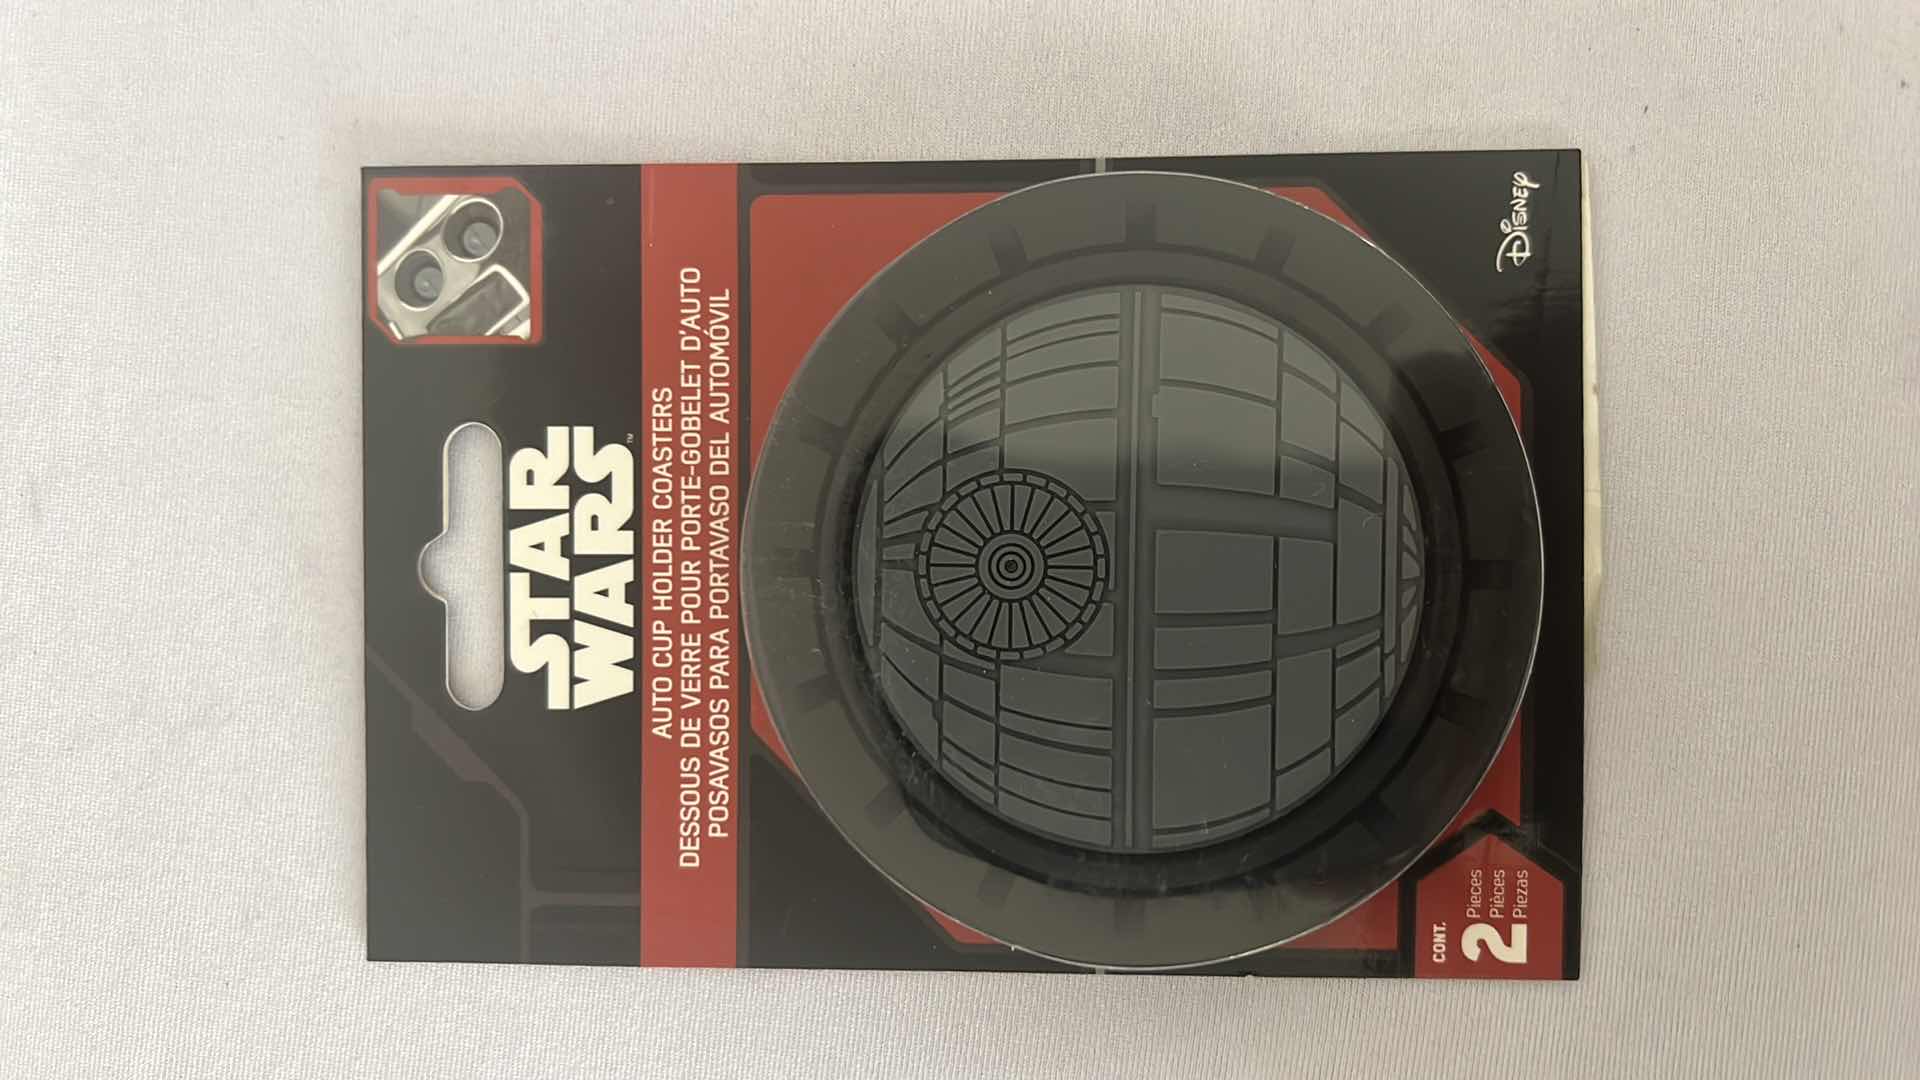 Photo 3 of 4-BRAND NEW STAR WARS DEATH STAR 2-PACK CAR CUP COASTER SETS $40 (8 TOTAL CAR COASTERS)